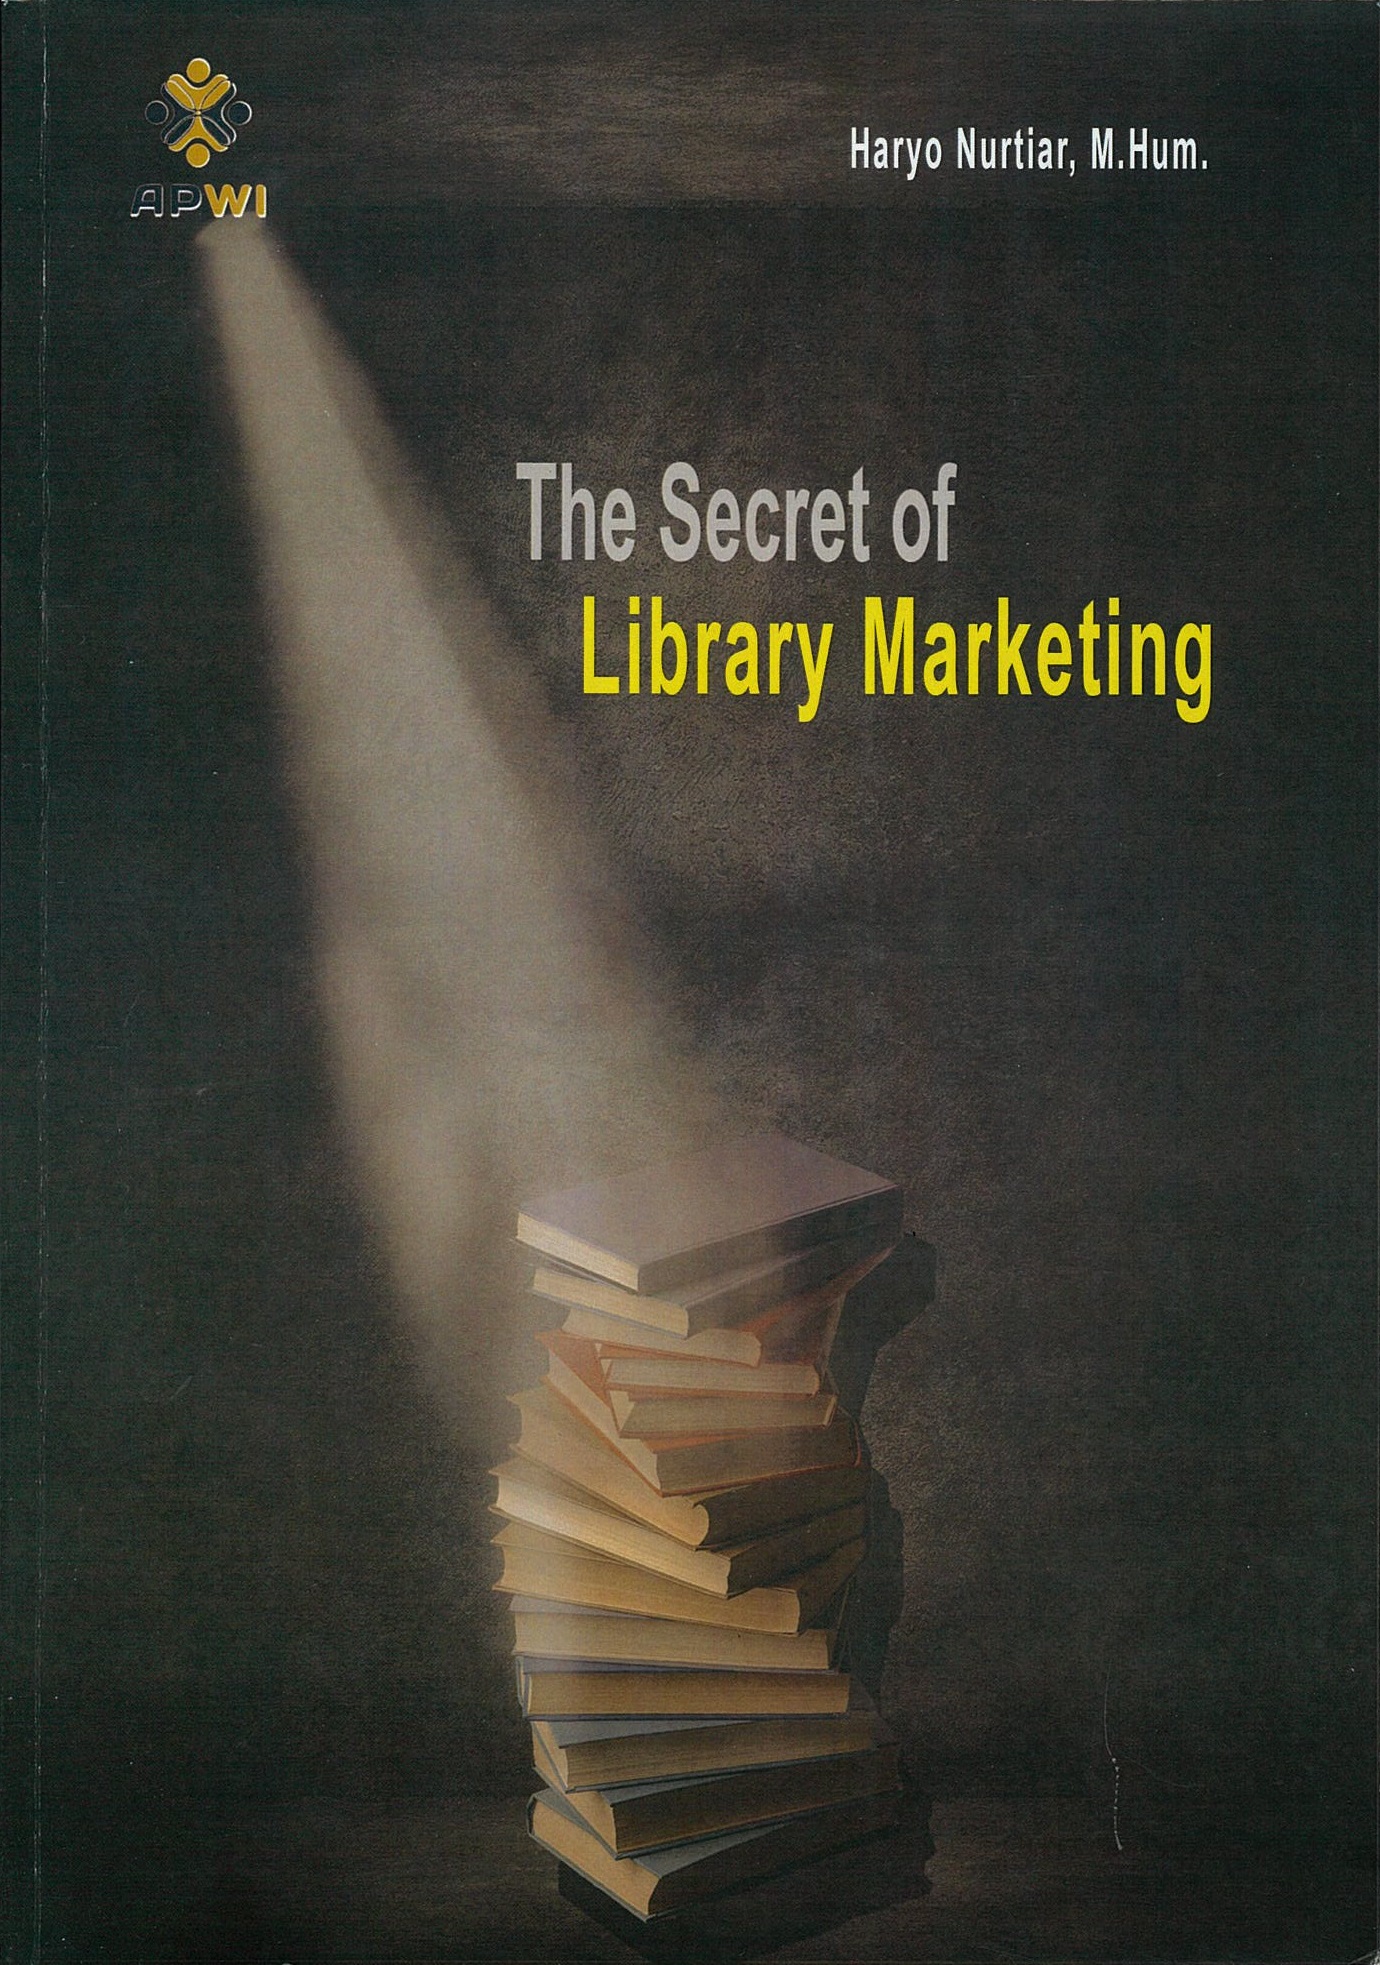 The secret of library marketing